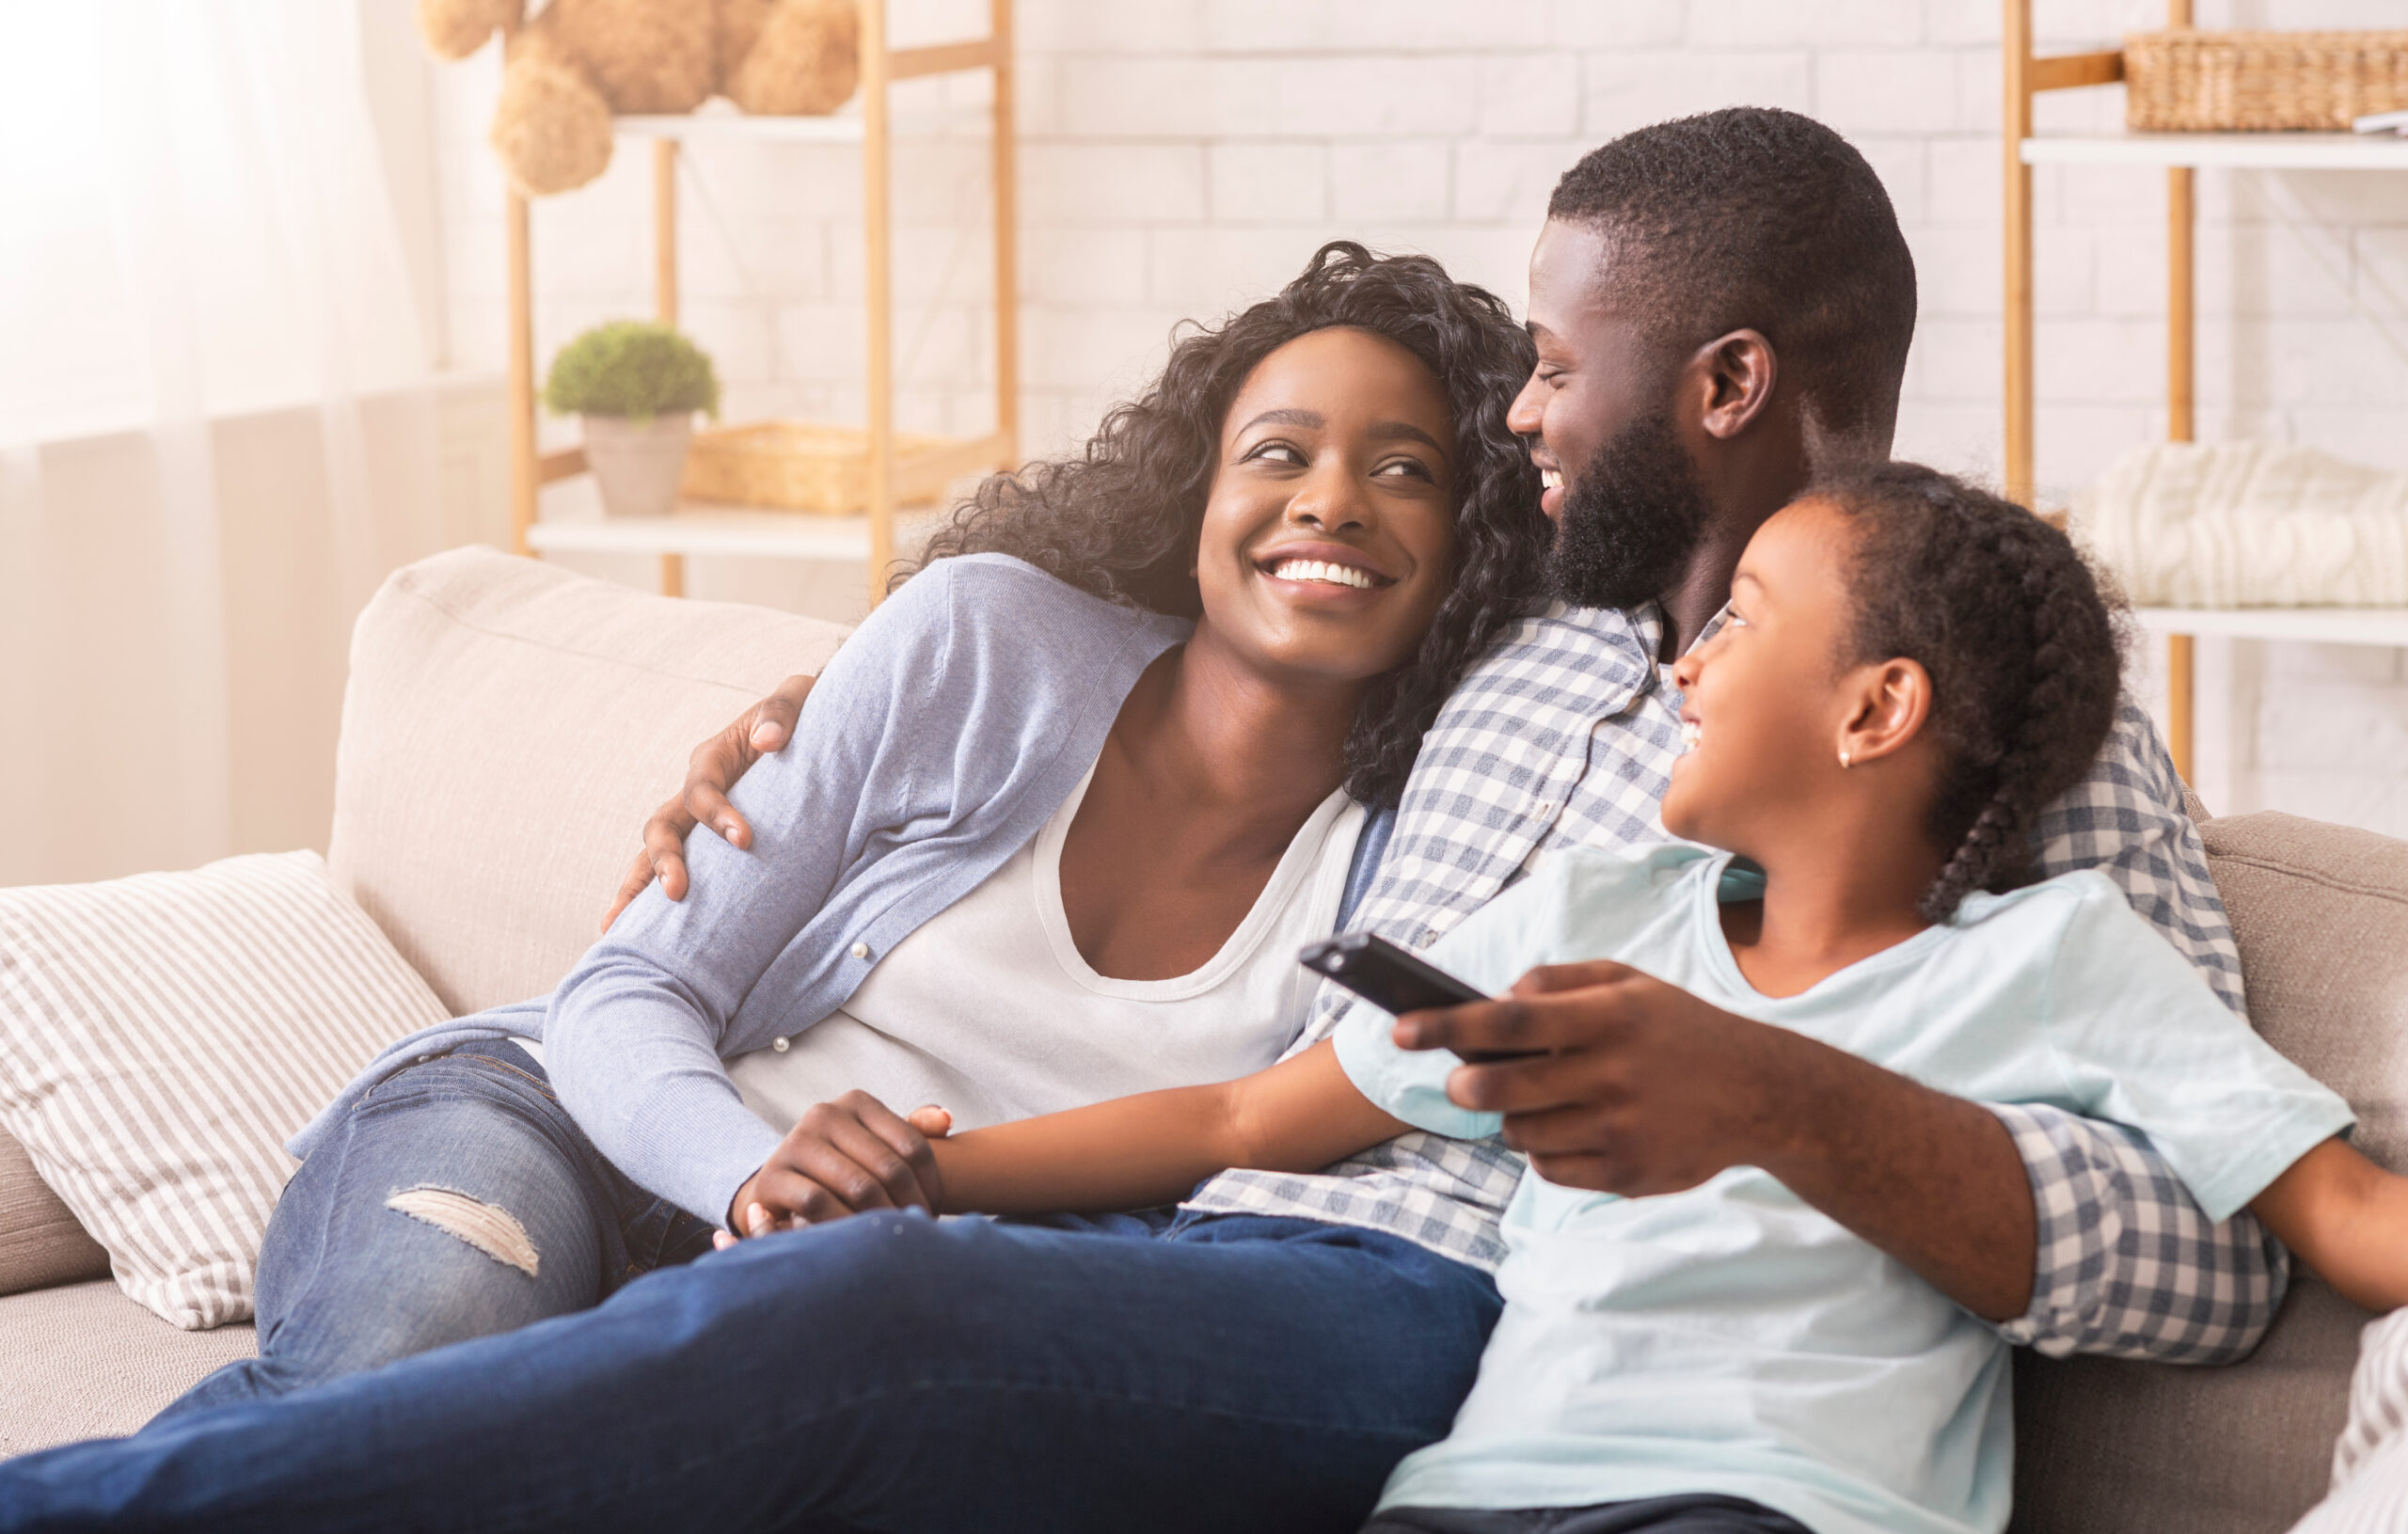 Photo of Cheerful Black Family Having Fun Together Watching TV Show